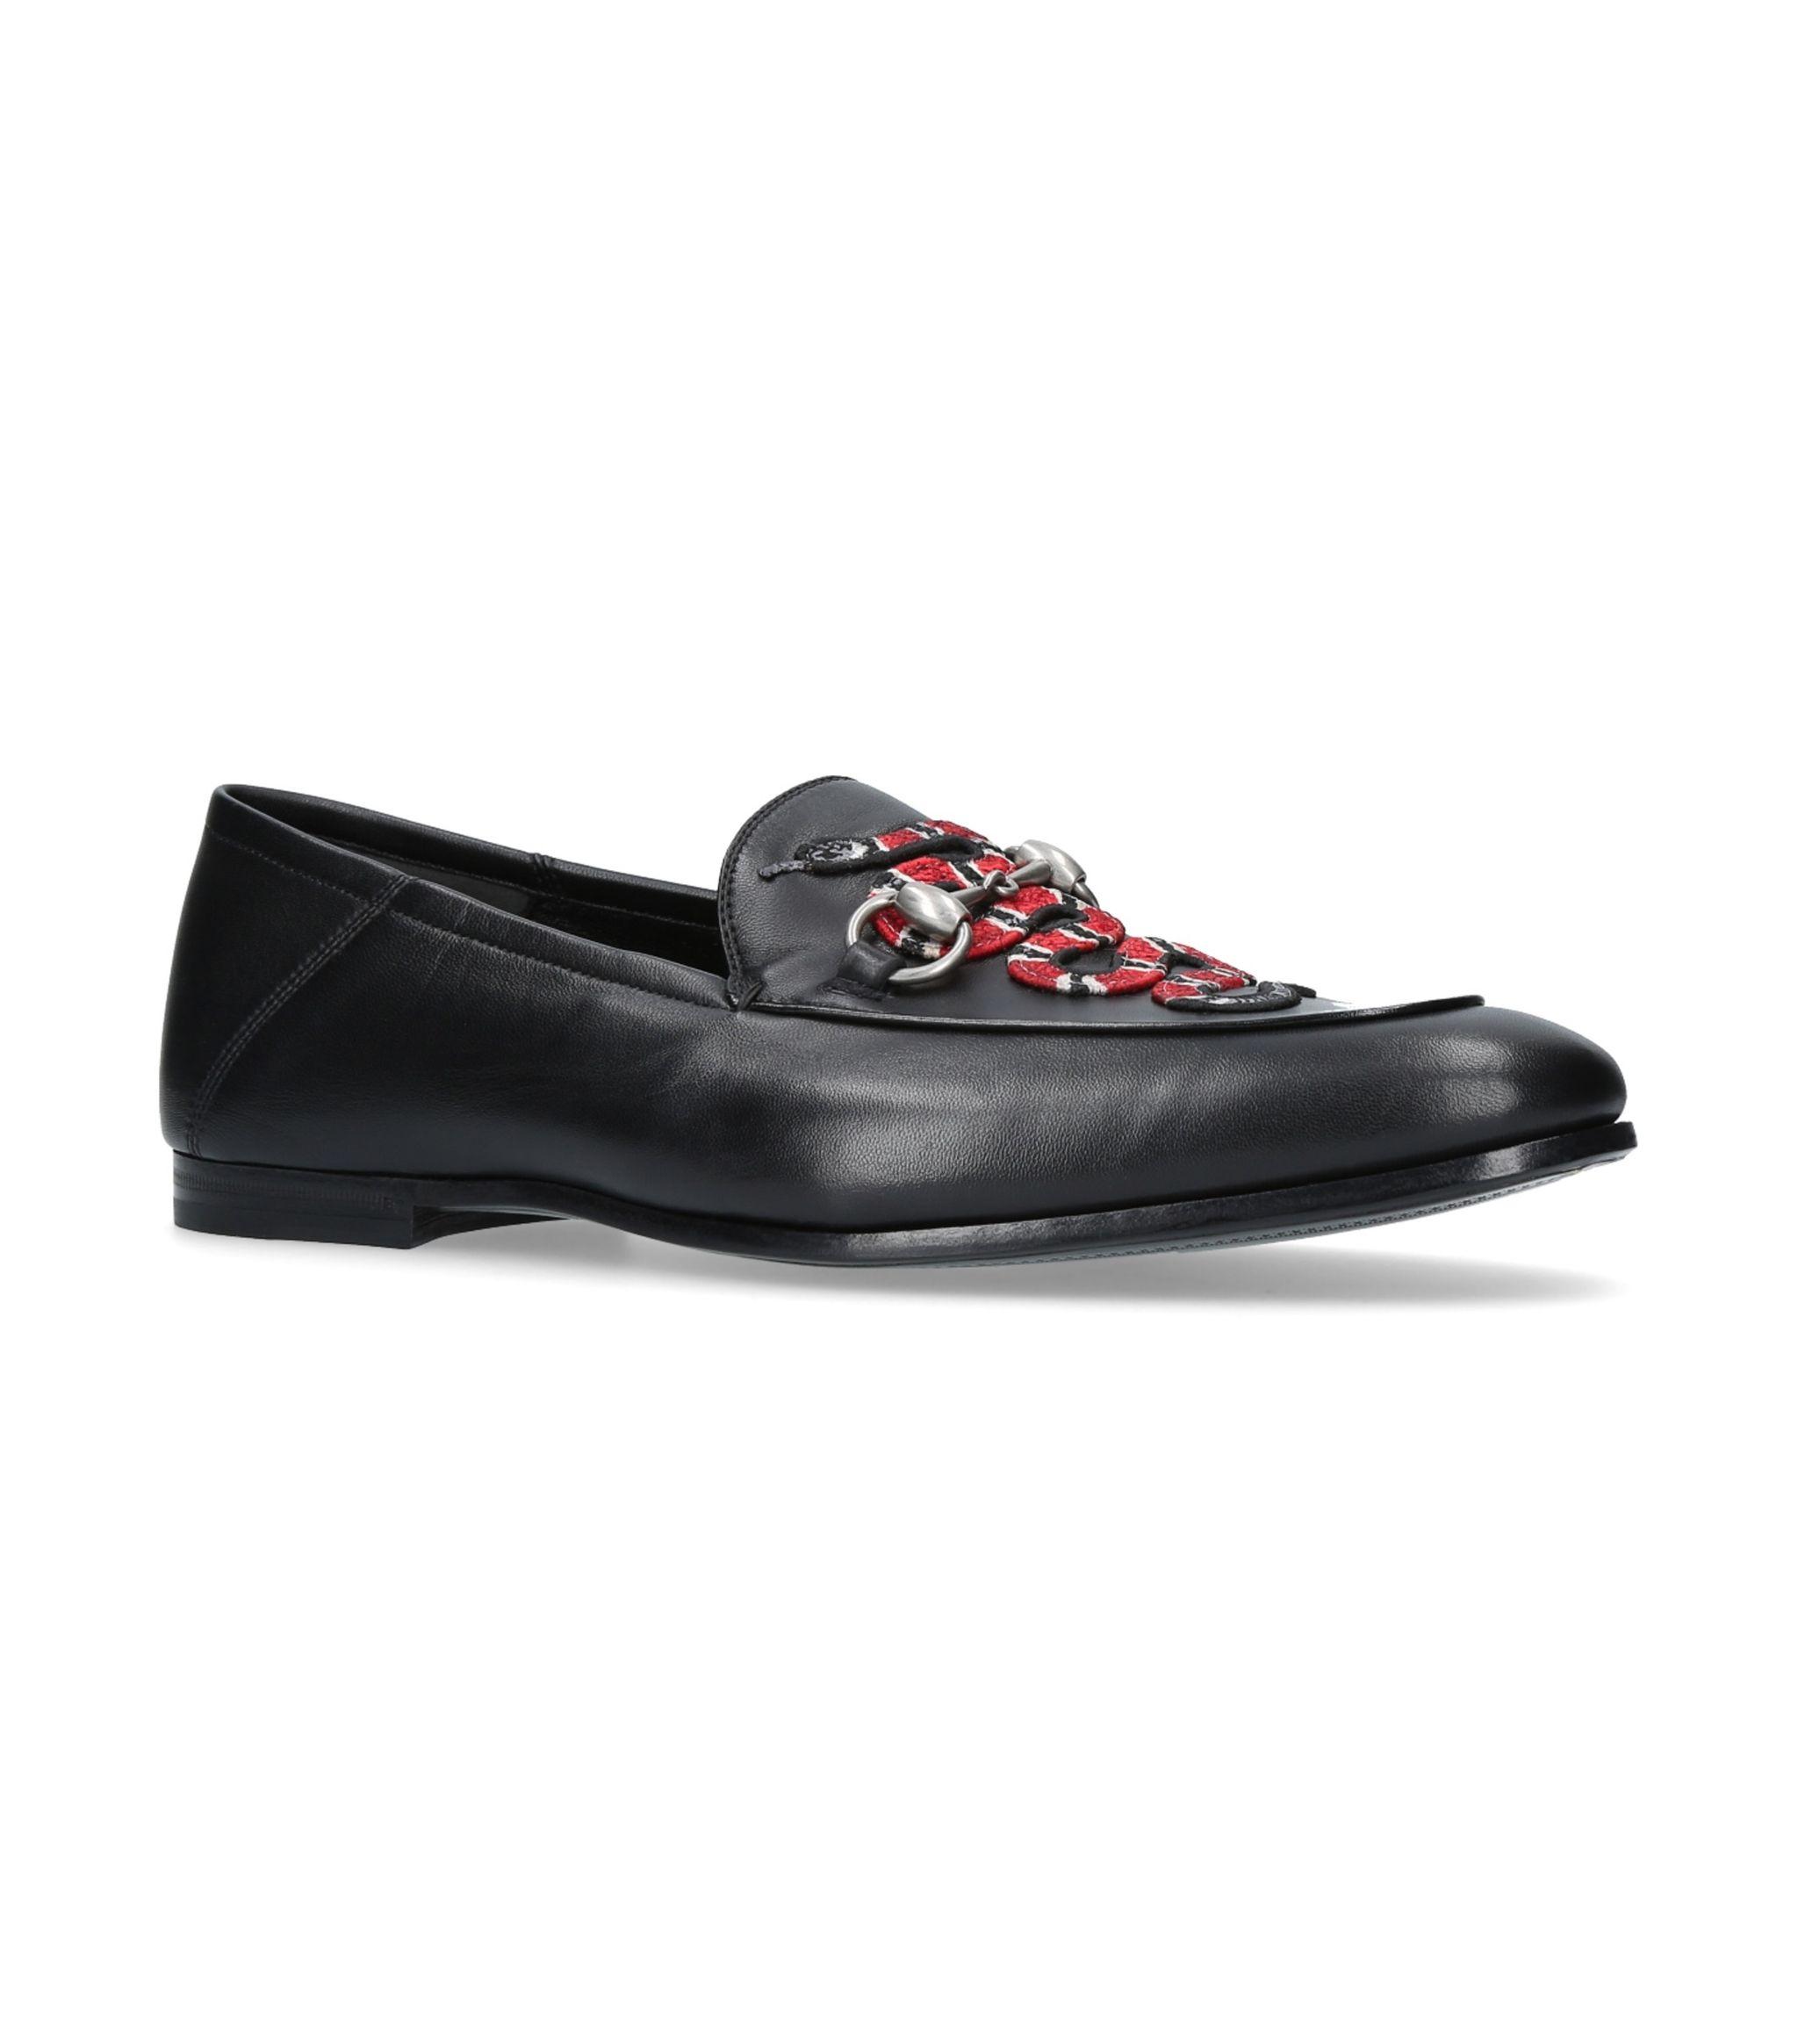 Gucci Leather Brixton Snake Loafers in Black for Men - Lyst